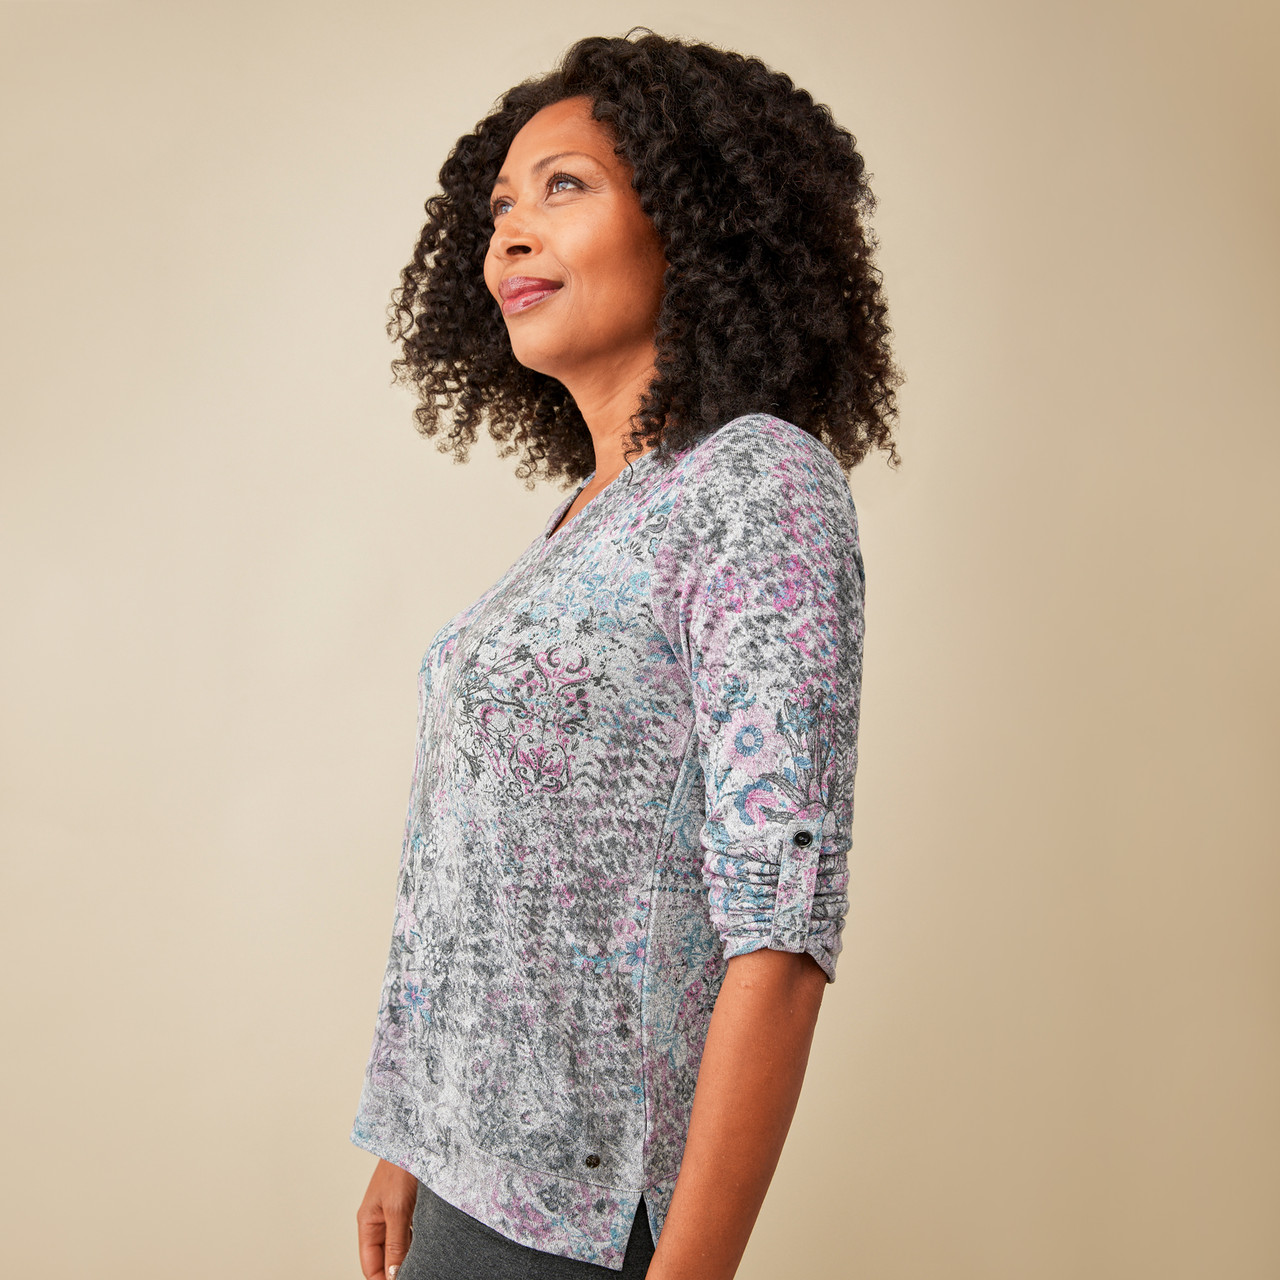 Women's Petite - Roll Tab Patterned Top | Northern Reflections